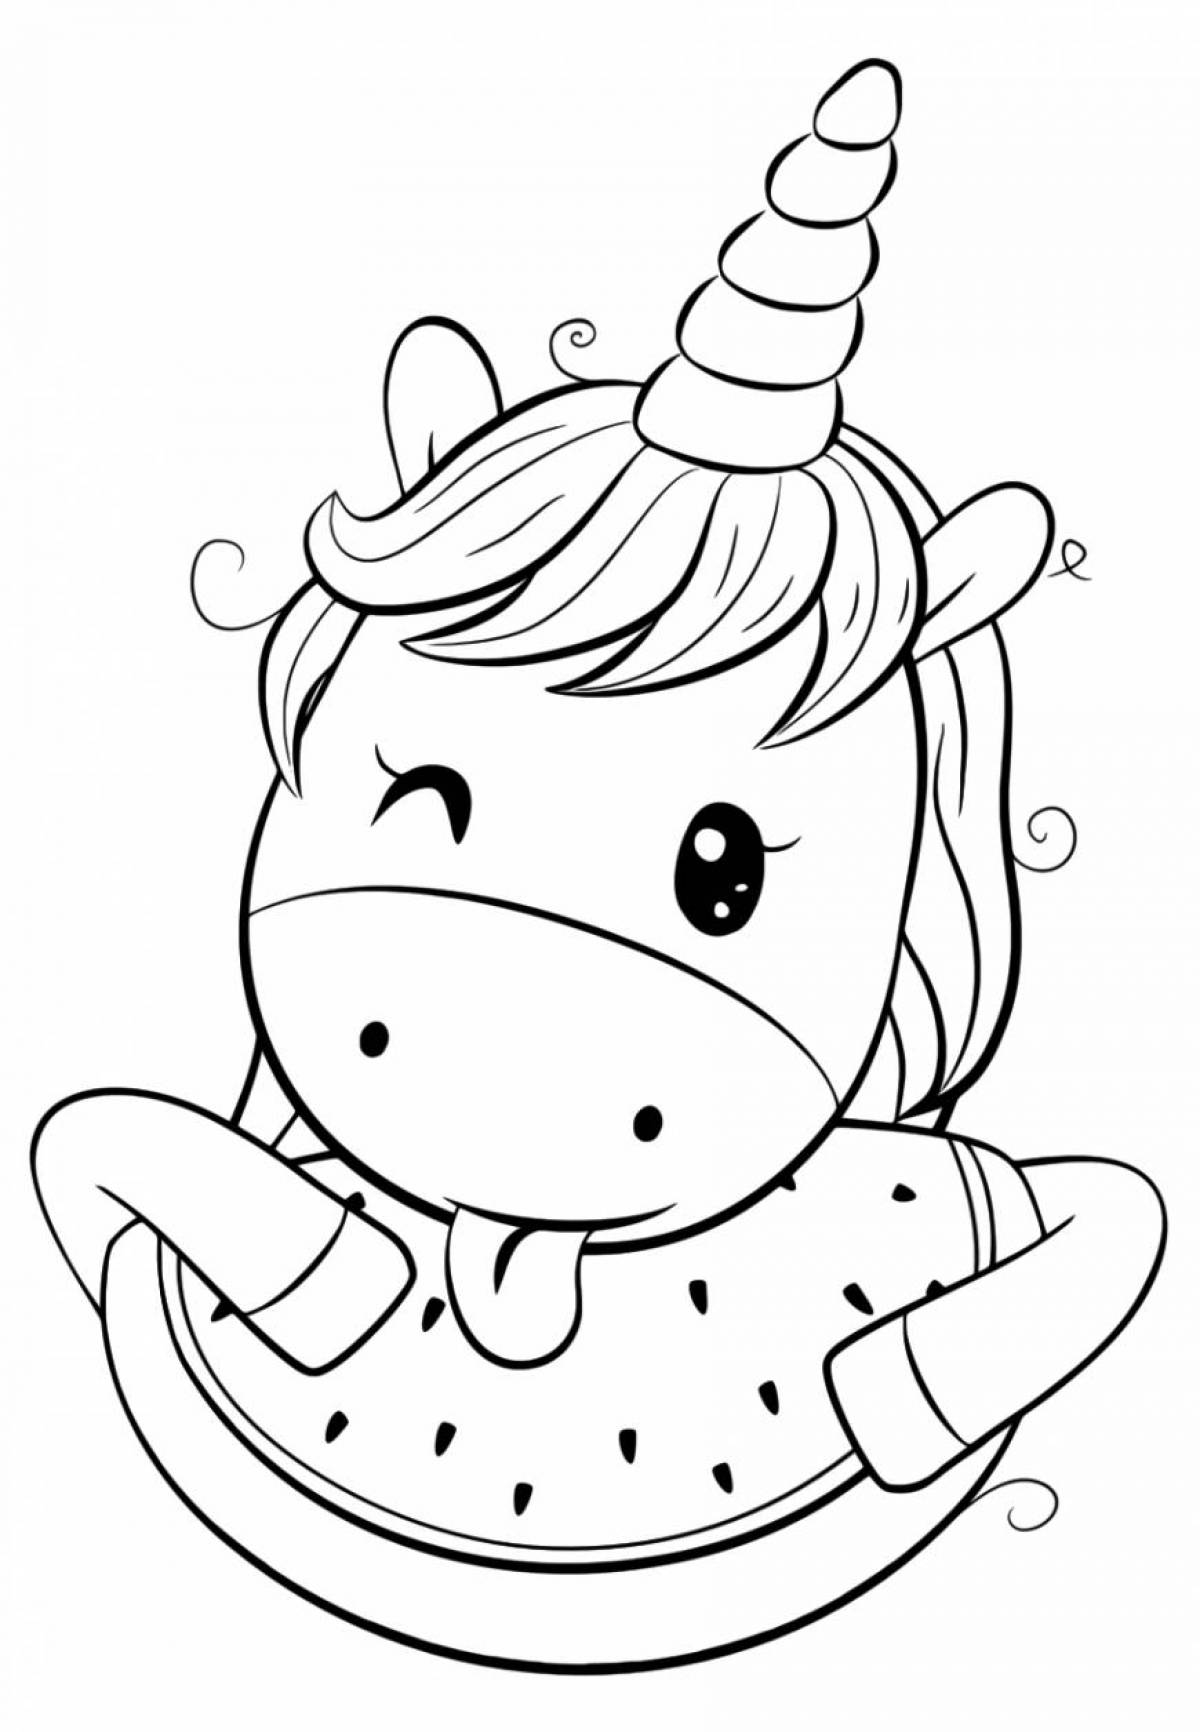 Magic unicorn coloring book for kids 6-7 years old